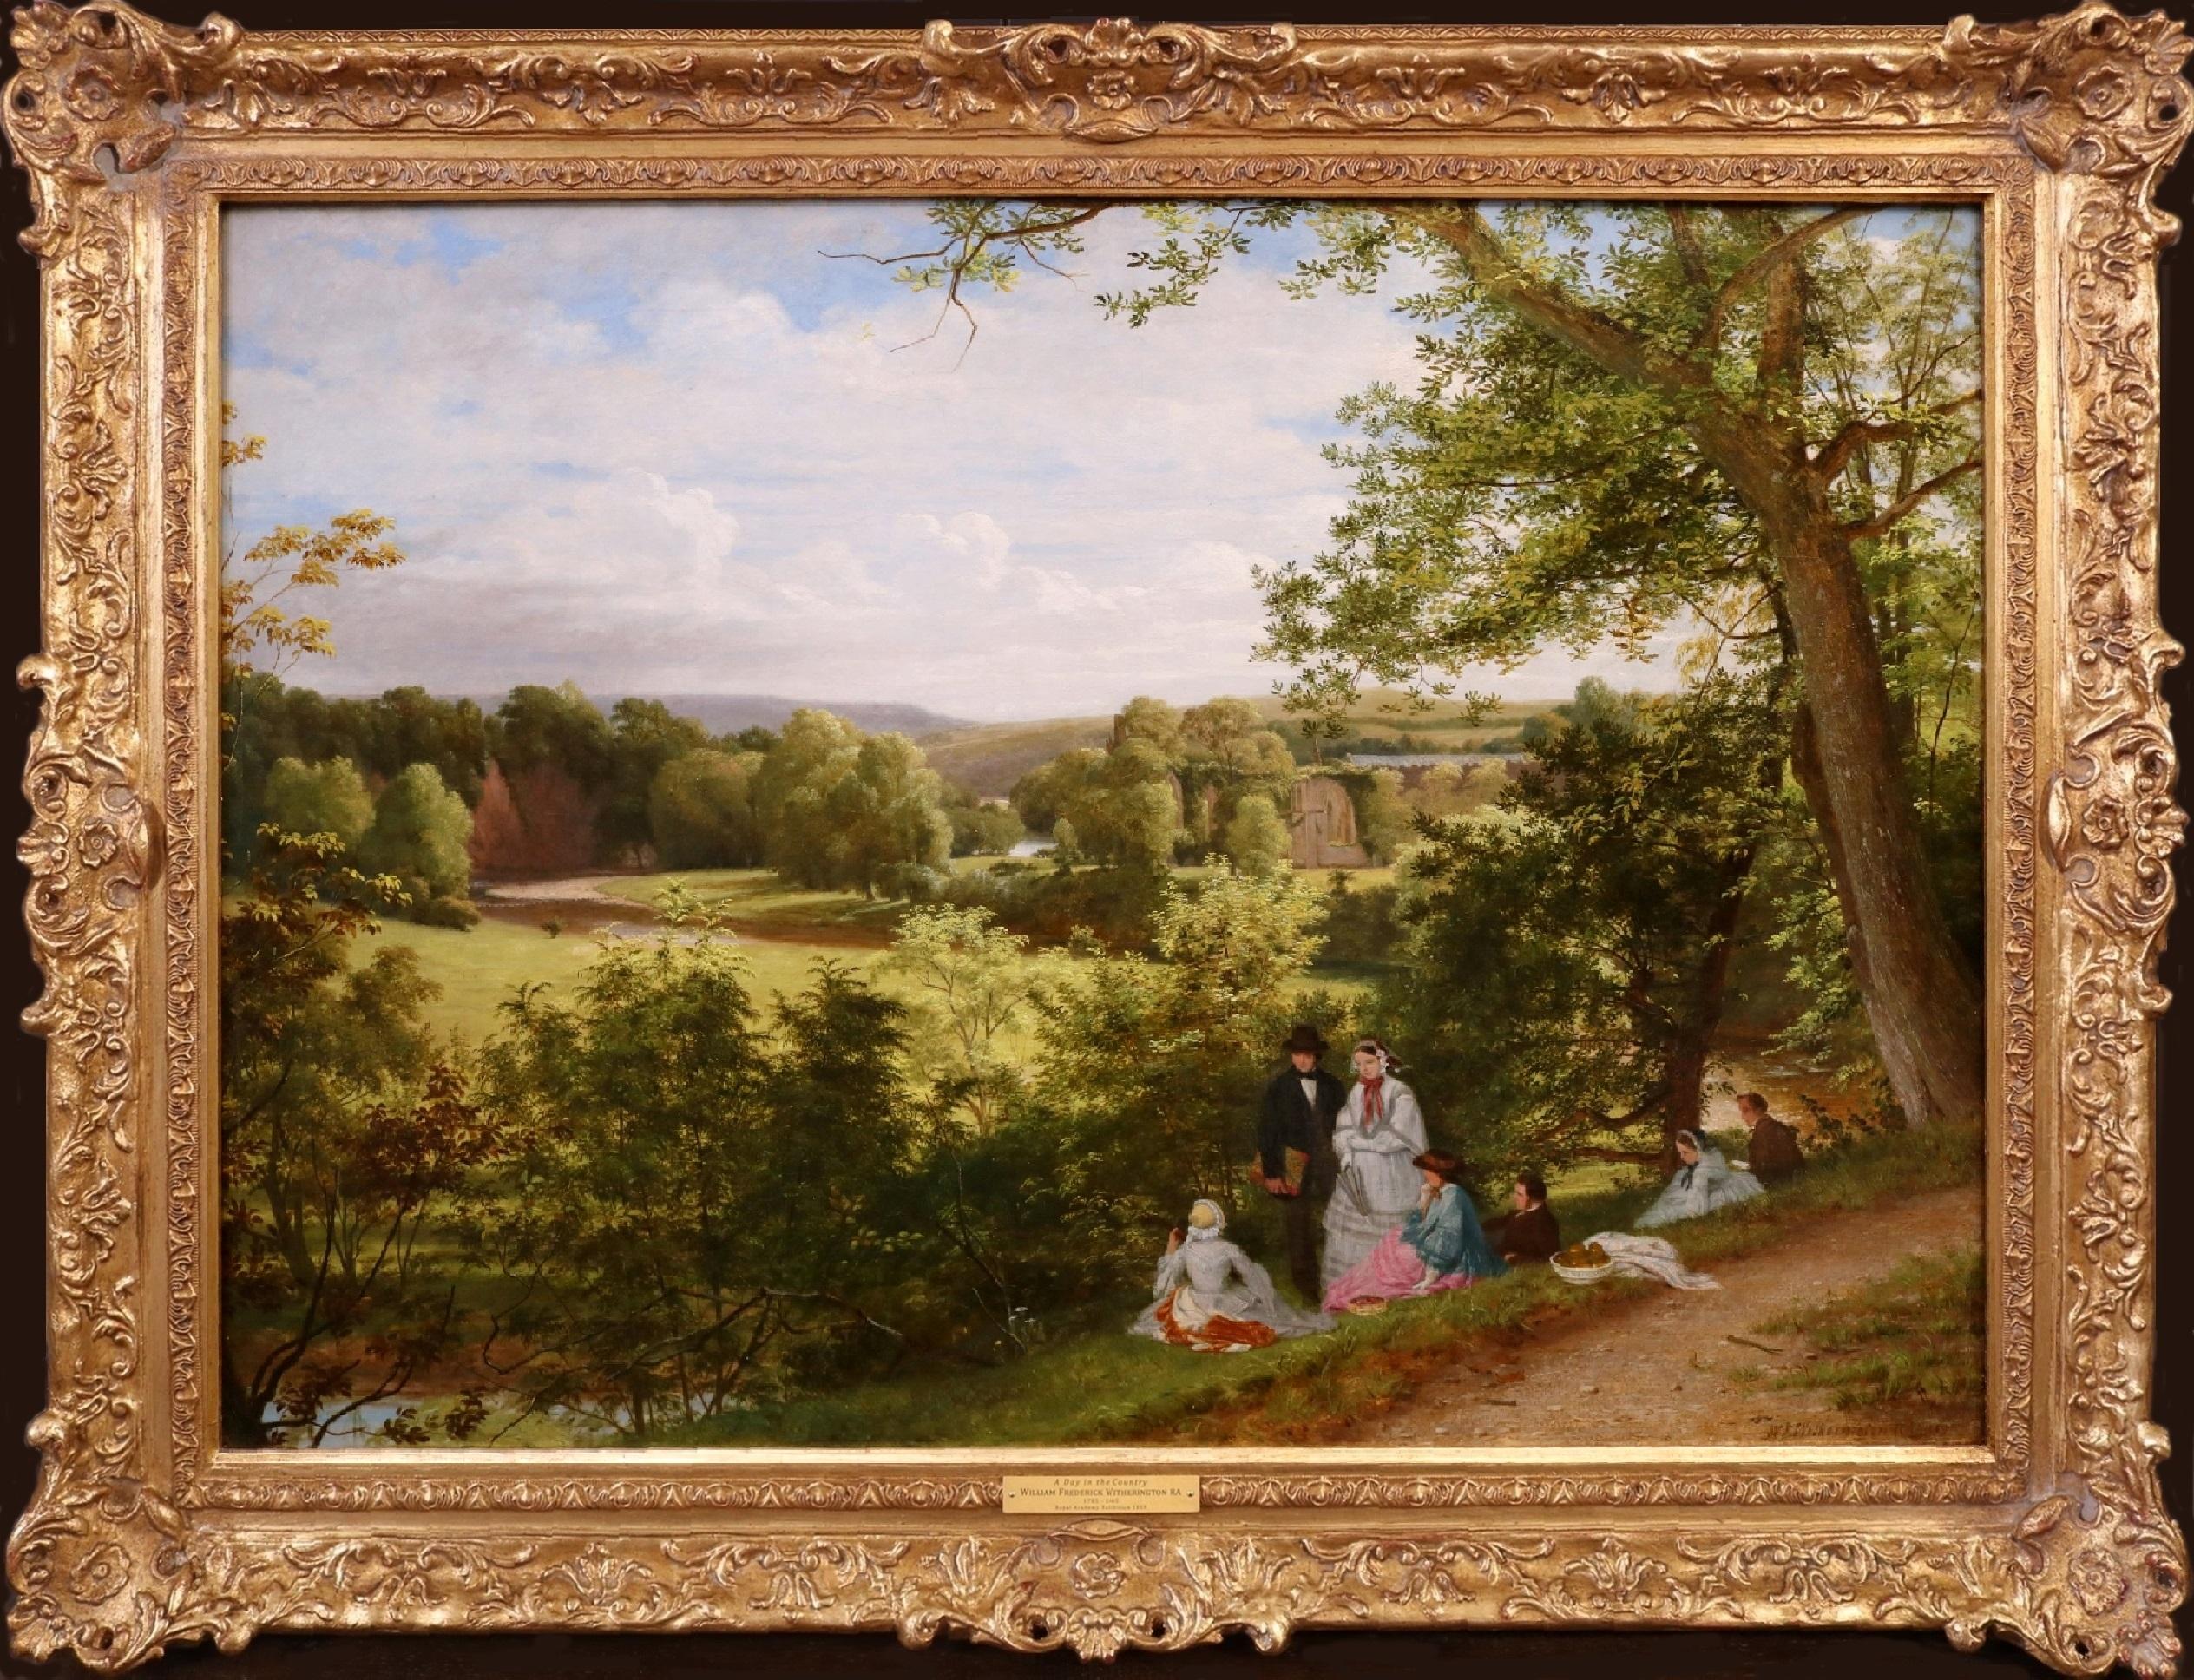 A Day in the County - Large 19th Century Royal Academy Landscape Oil Painting - Brown Figurative Painting by William Frederick Witherington